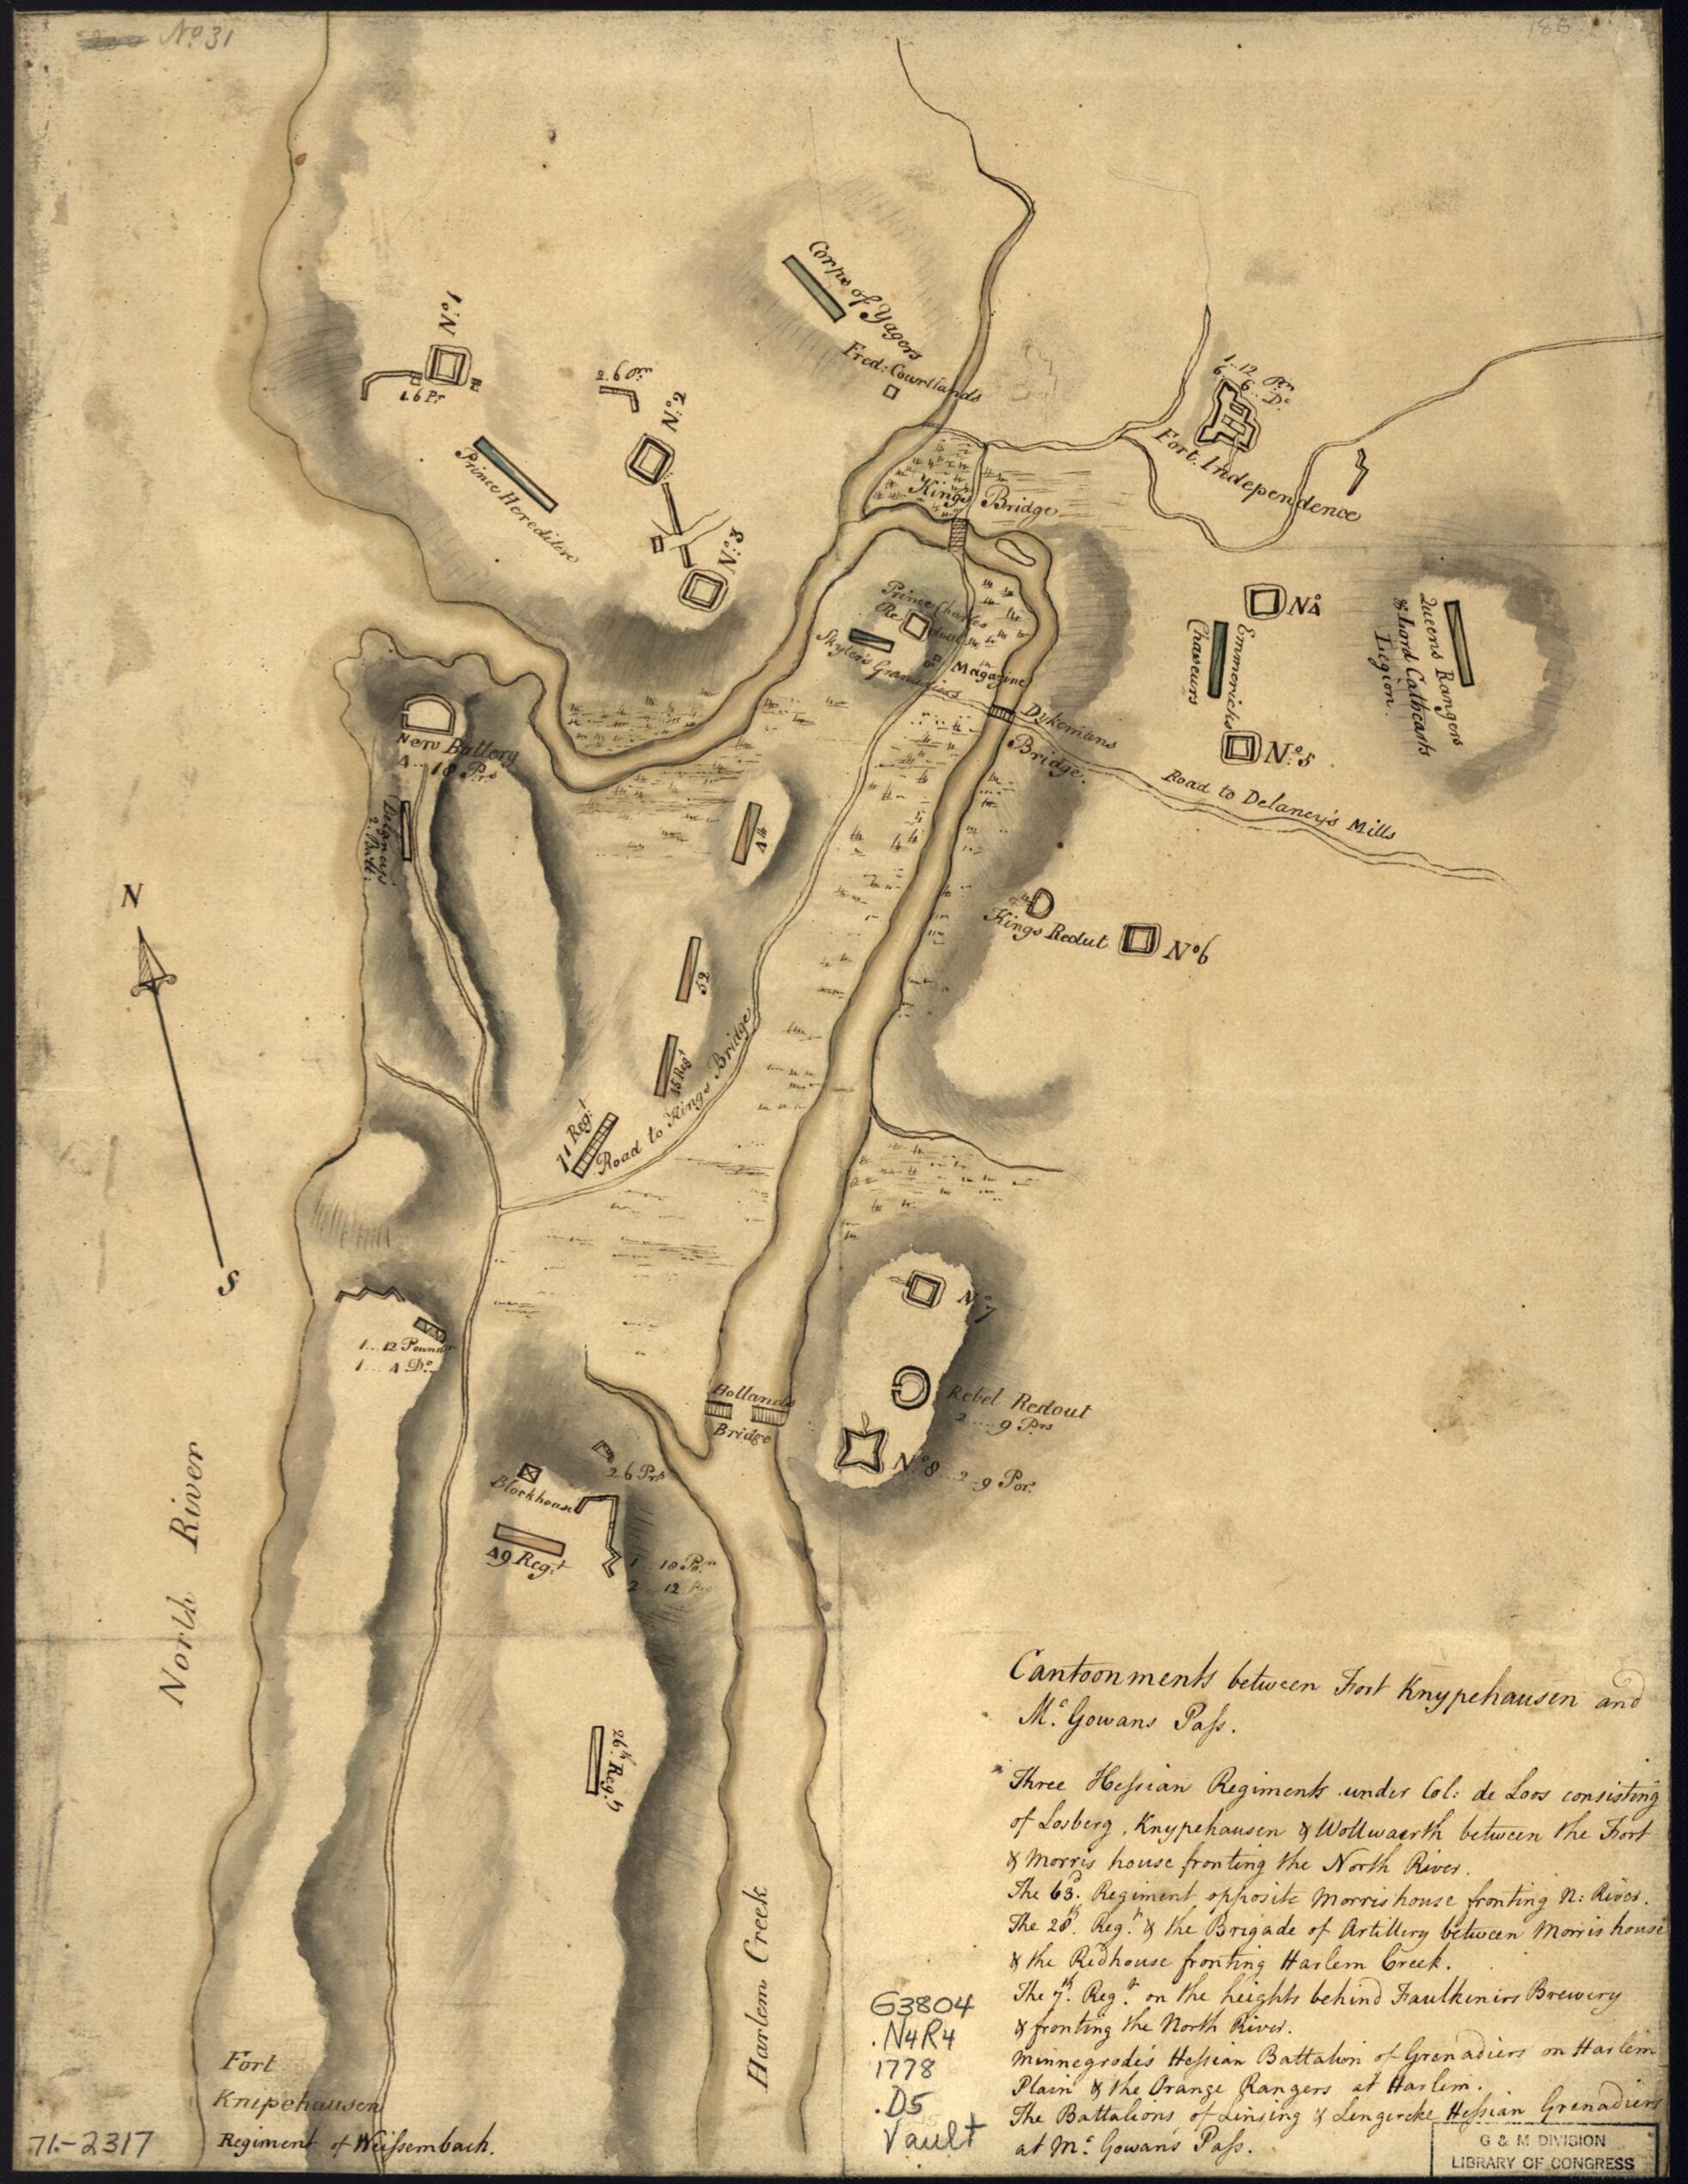 This old map of Disposition of British Troops, With Fortifications North of Fort Knipehausen, I.e. Fort Washington to Fort Independence from 1778 was created by John Montrésor in 1778